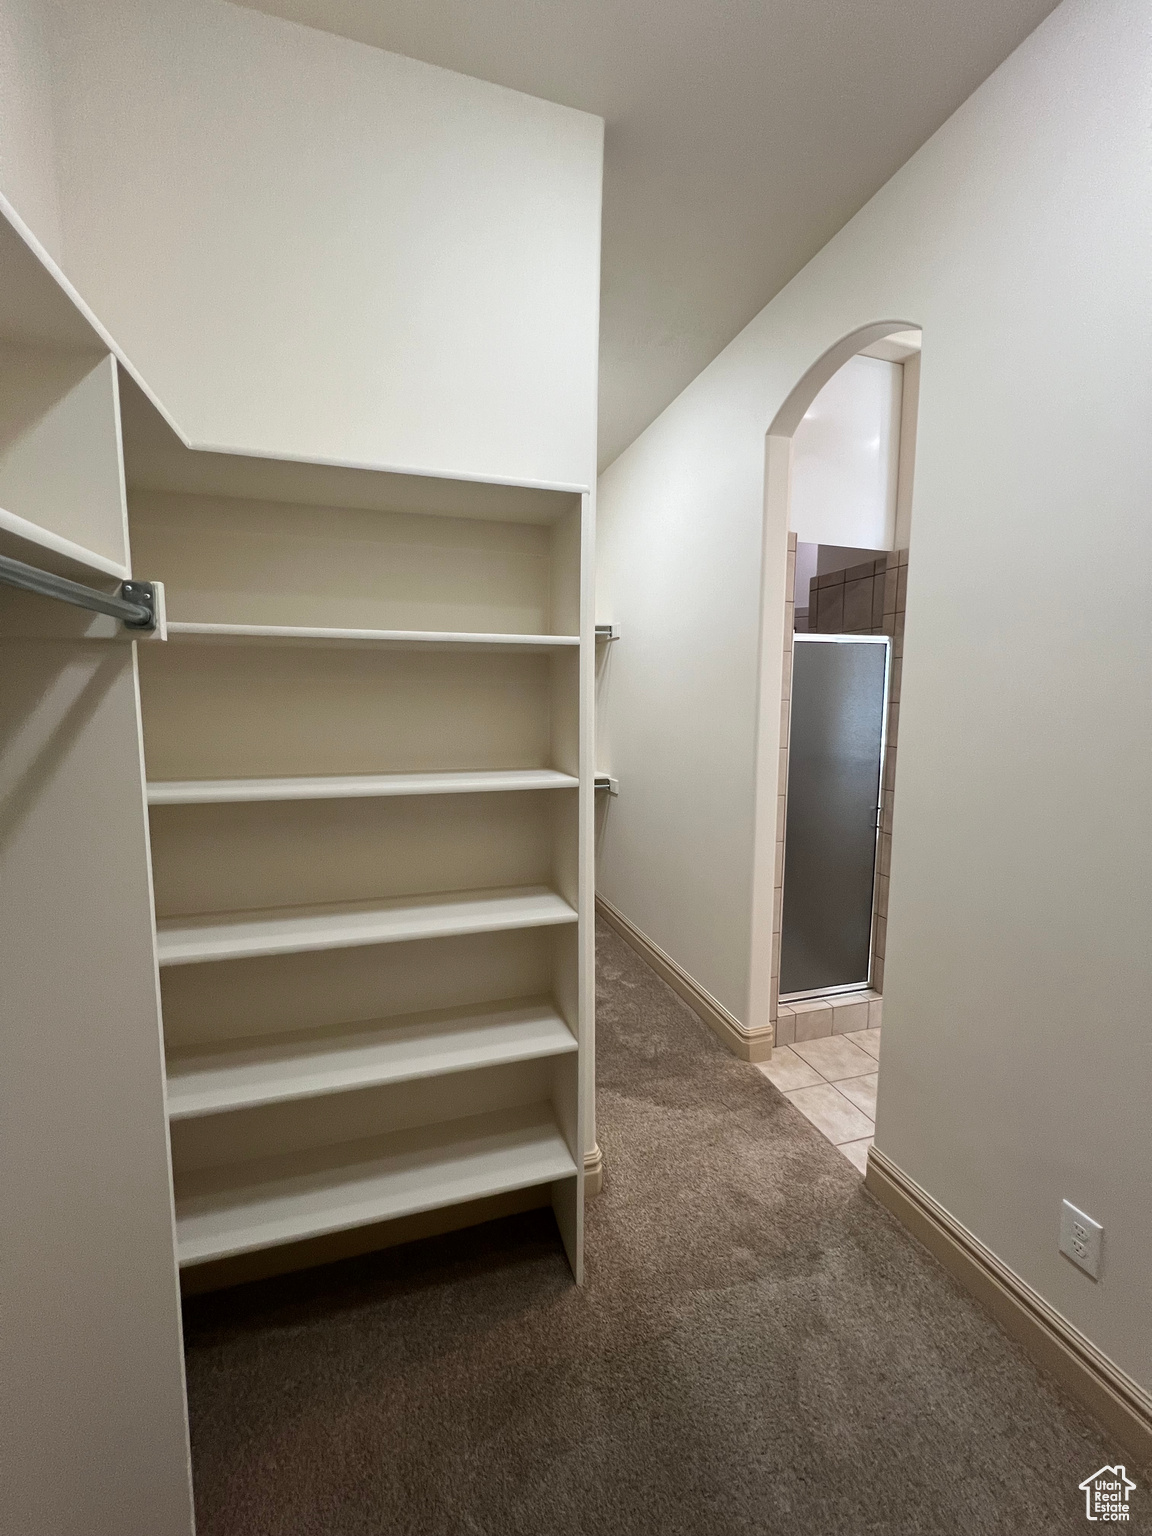 Spacious closet with carpet flooring - His/Hers sides